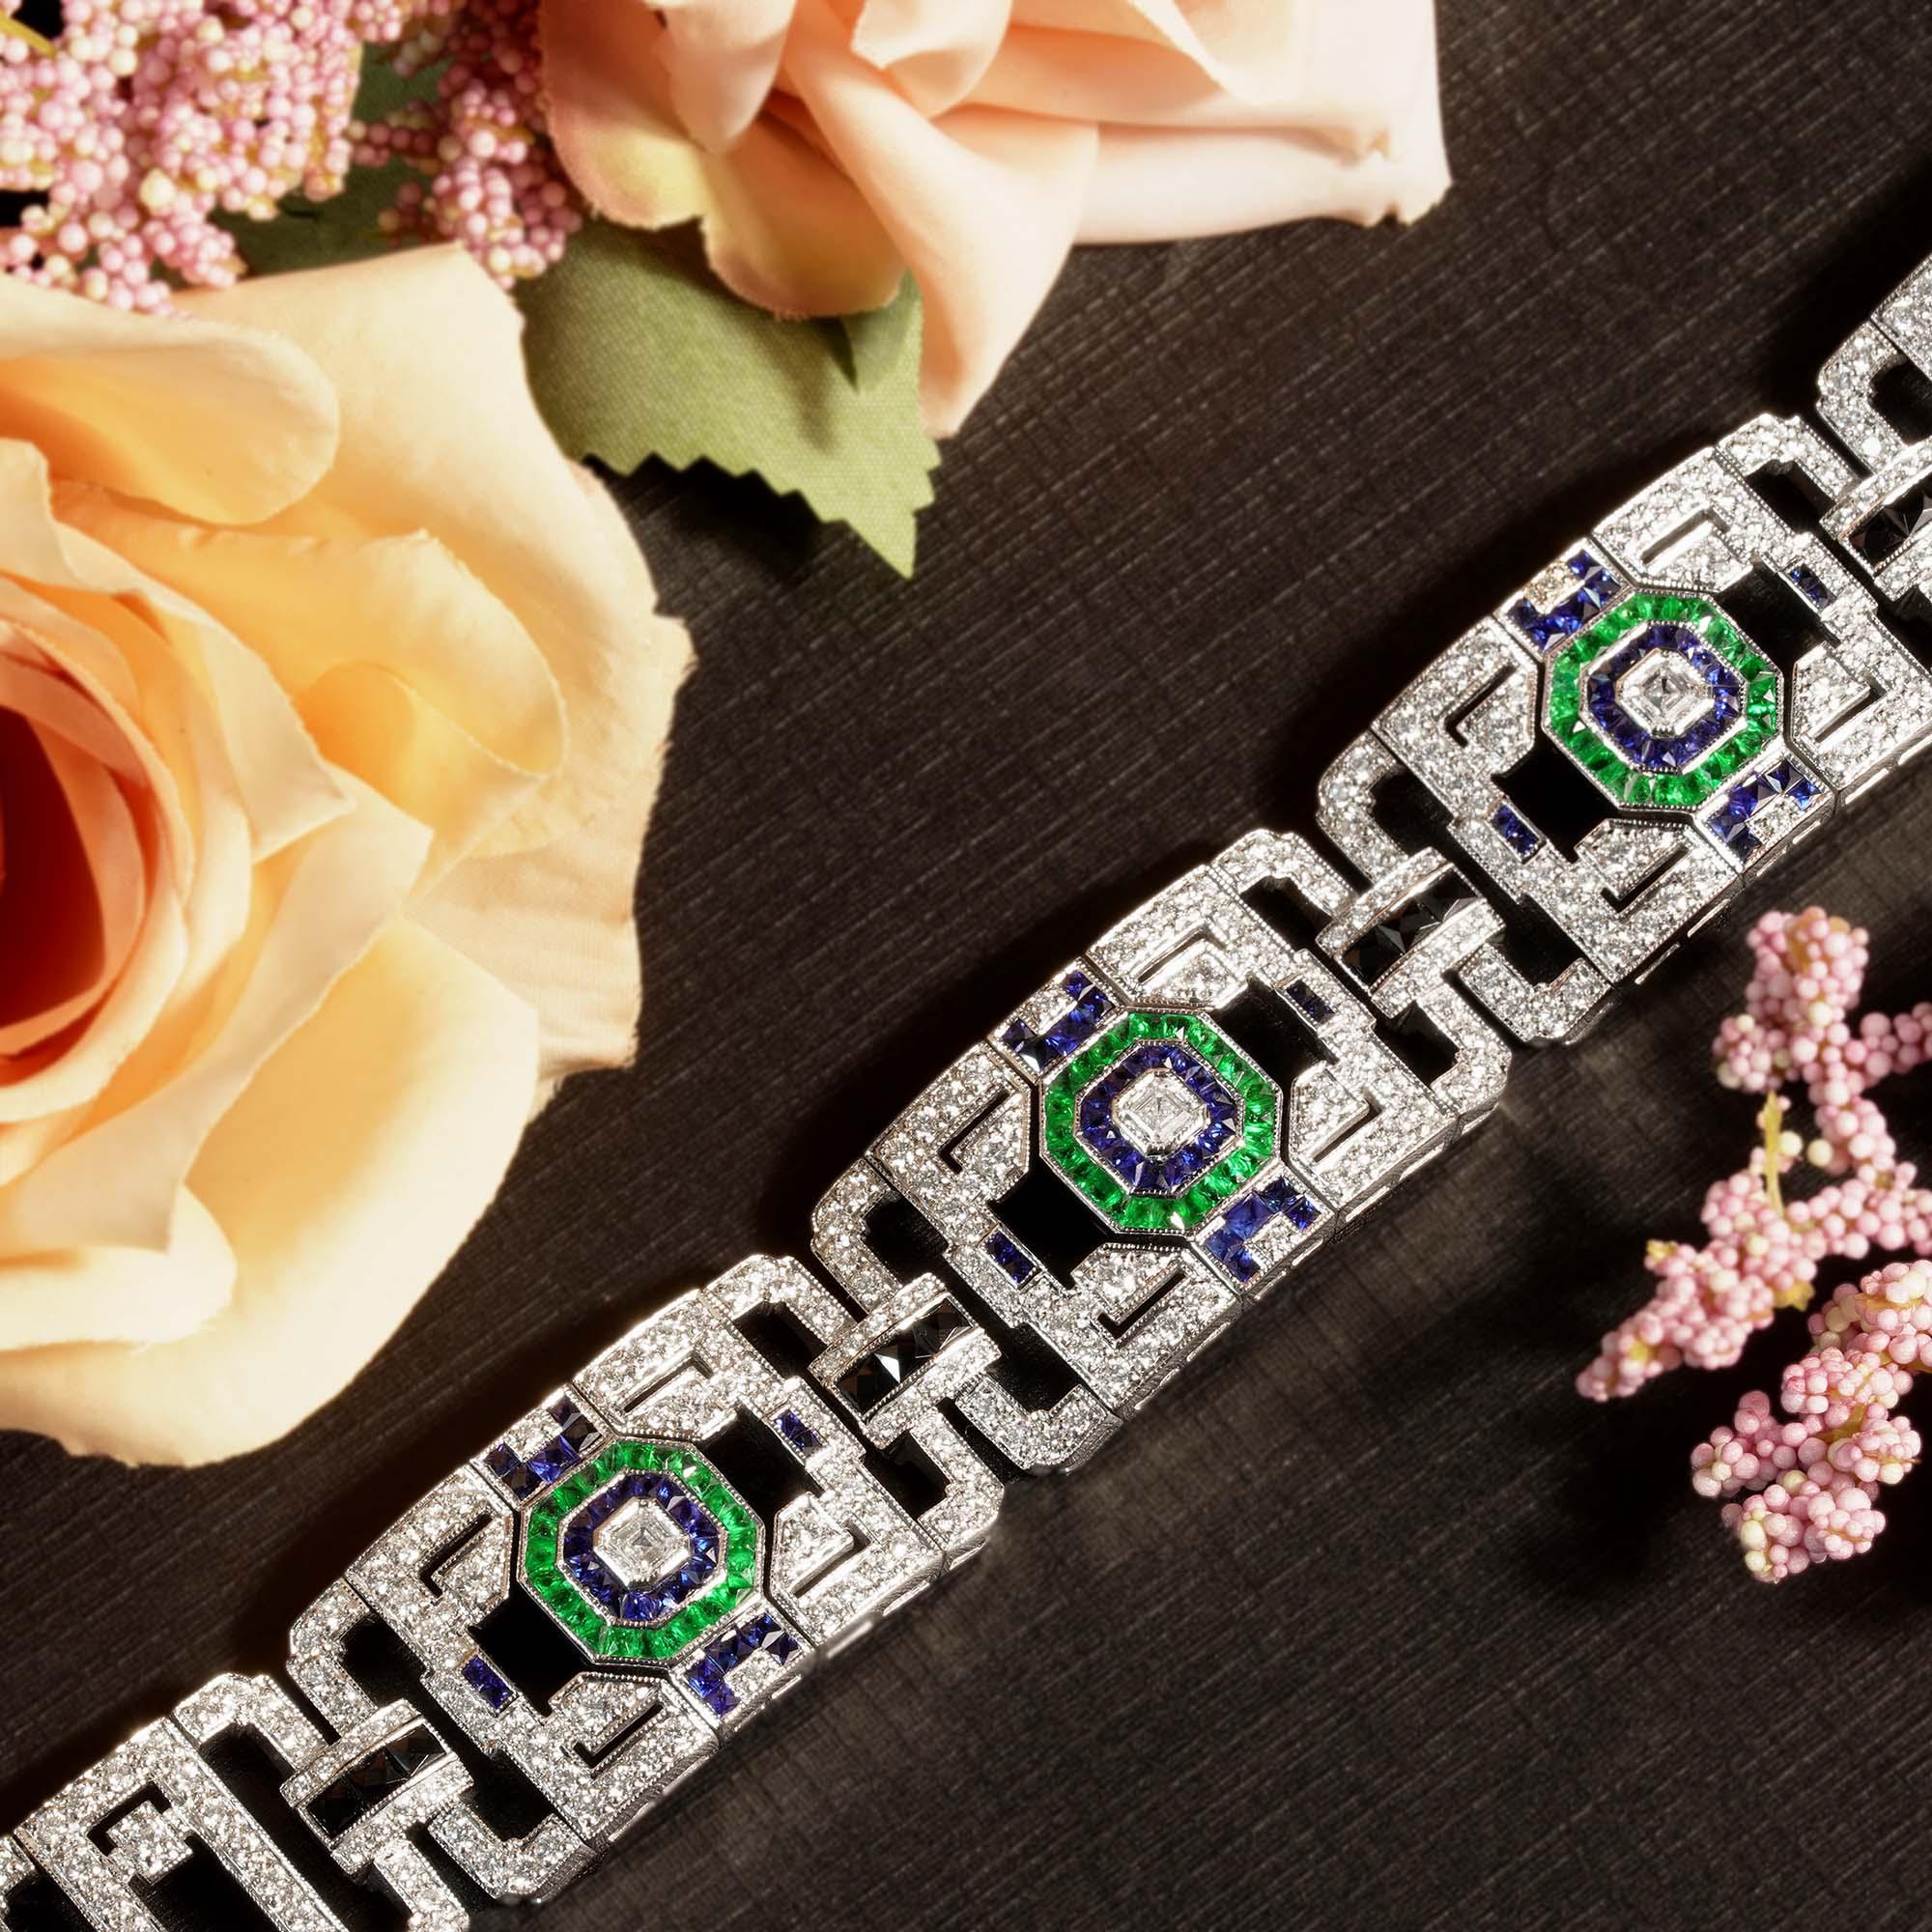 This elegance bracelet reverting “jazz age”. The feel of white gold and the sparkle from the diamonds and gemstones all come together perfectly in this magnificent details. The bracelet features four open geometric panels set with Asscher cut